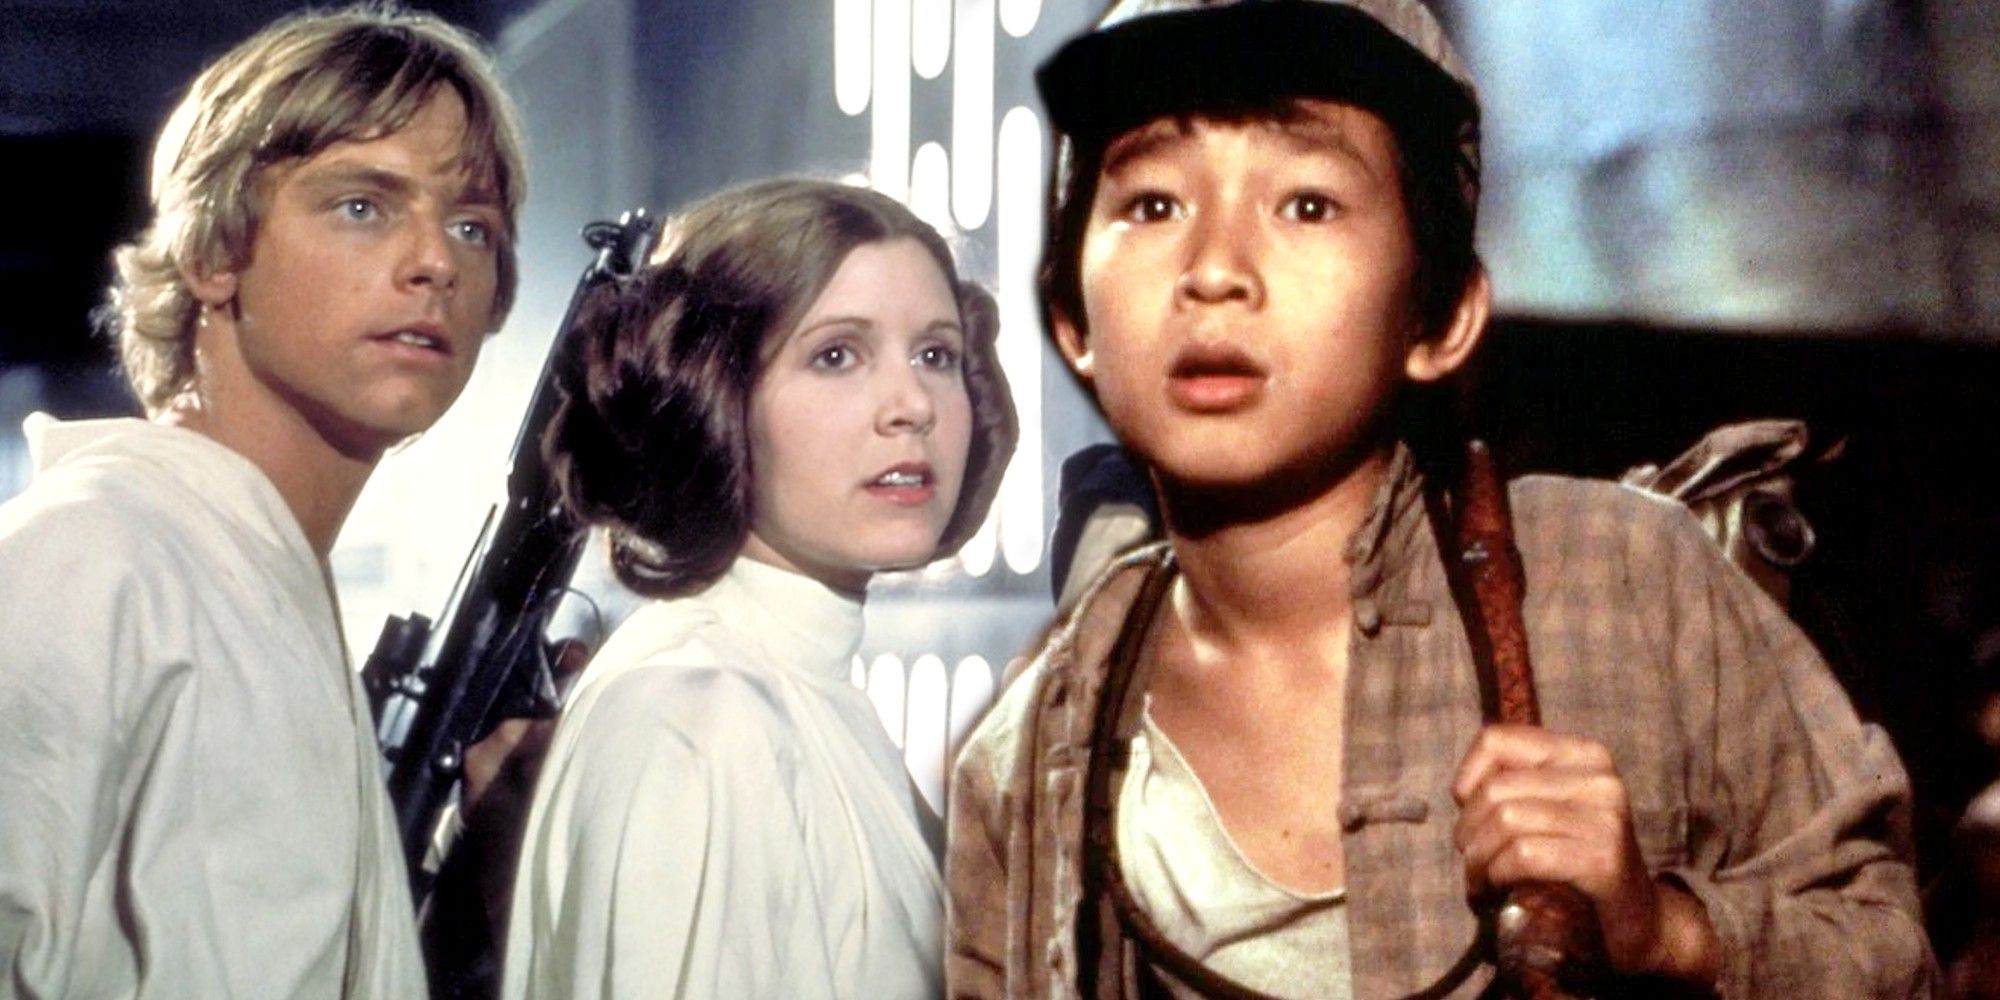 Indiana Jones Actor Recalls Mark Hamill & Carrie Fisher Visiting The Set